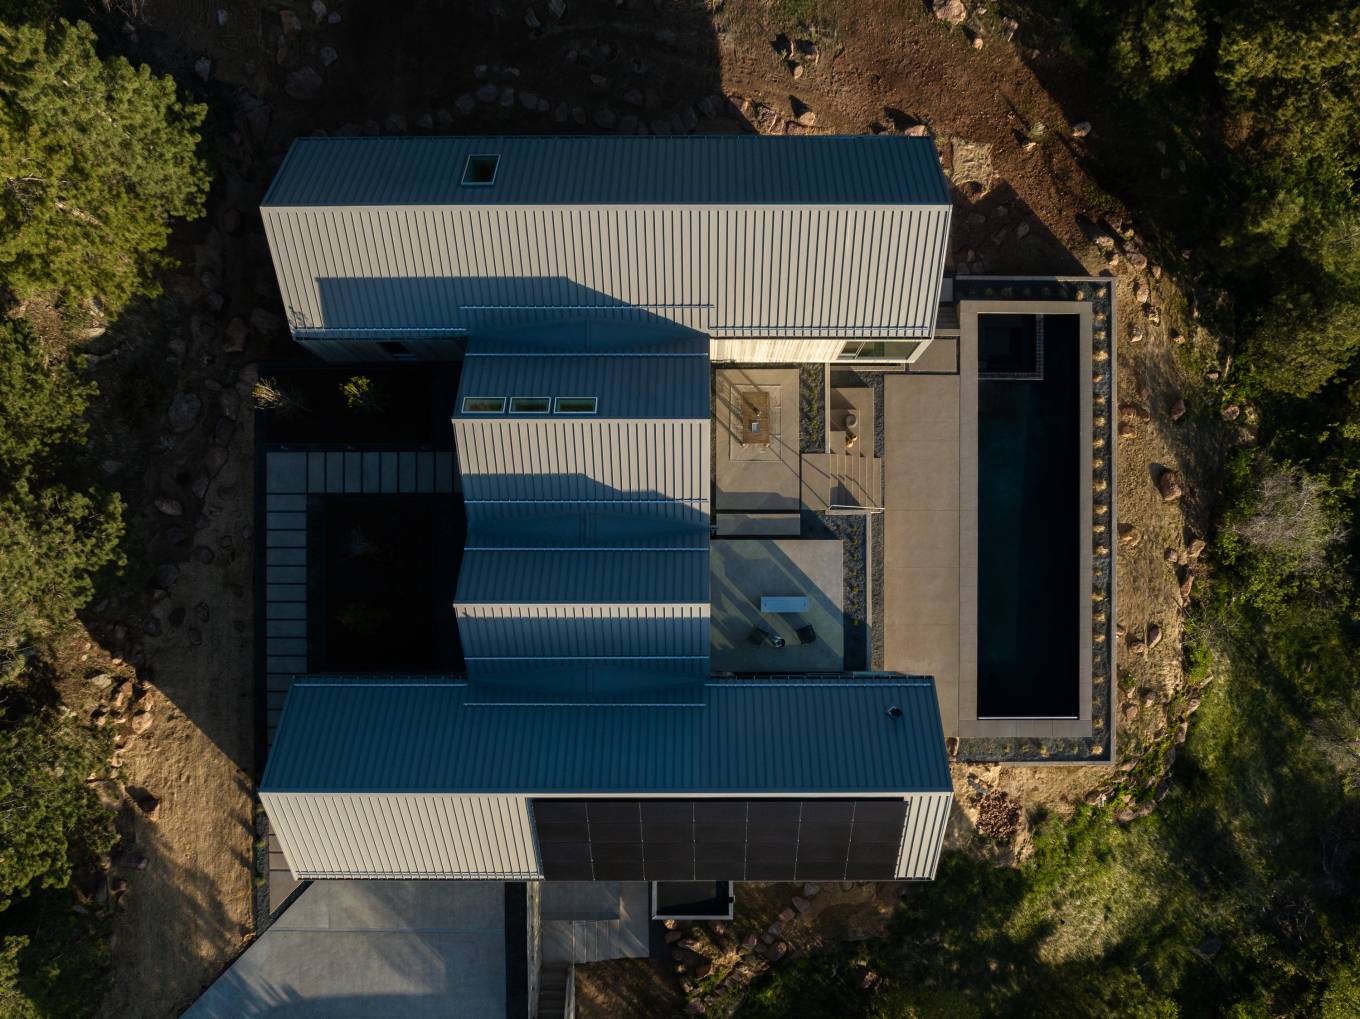 The distinctive “H” shape of plan creates two distinctive private courtyards oriented to connect the views and natural light on site.